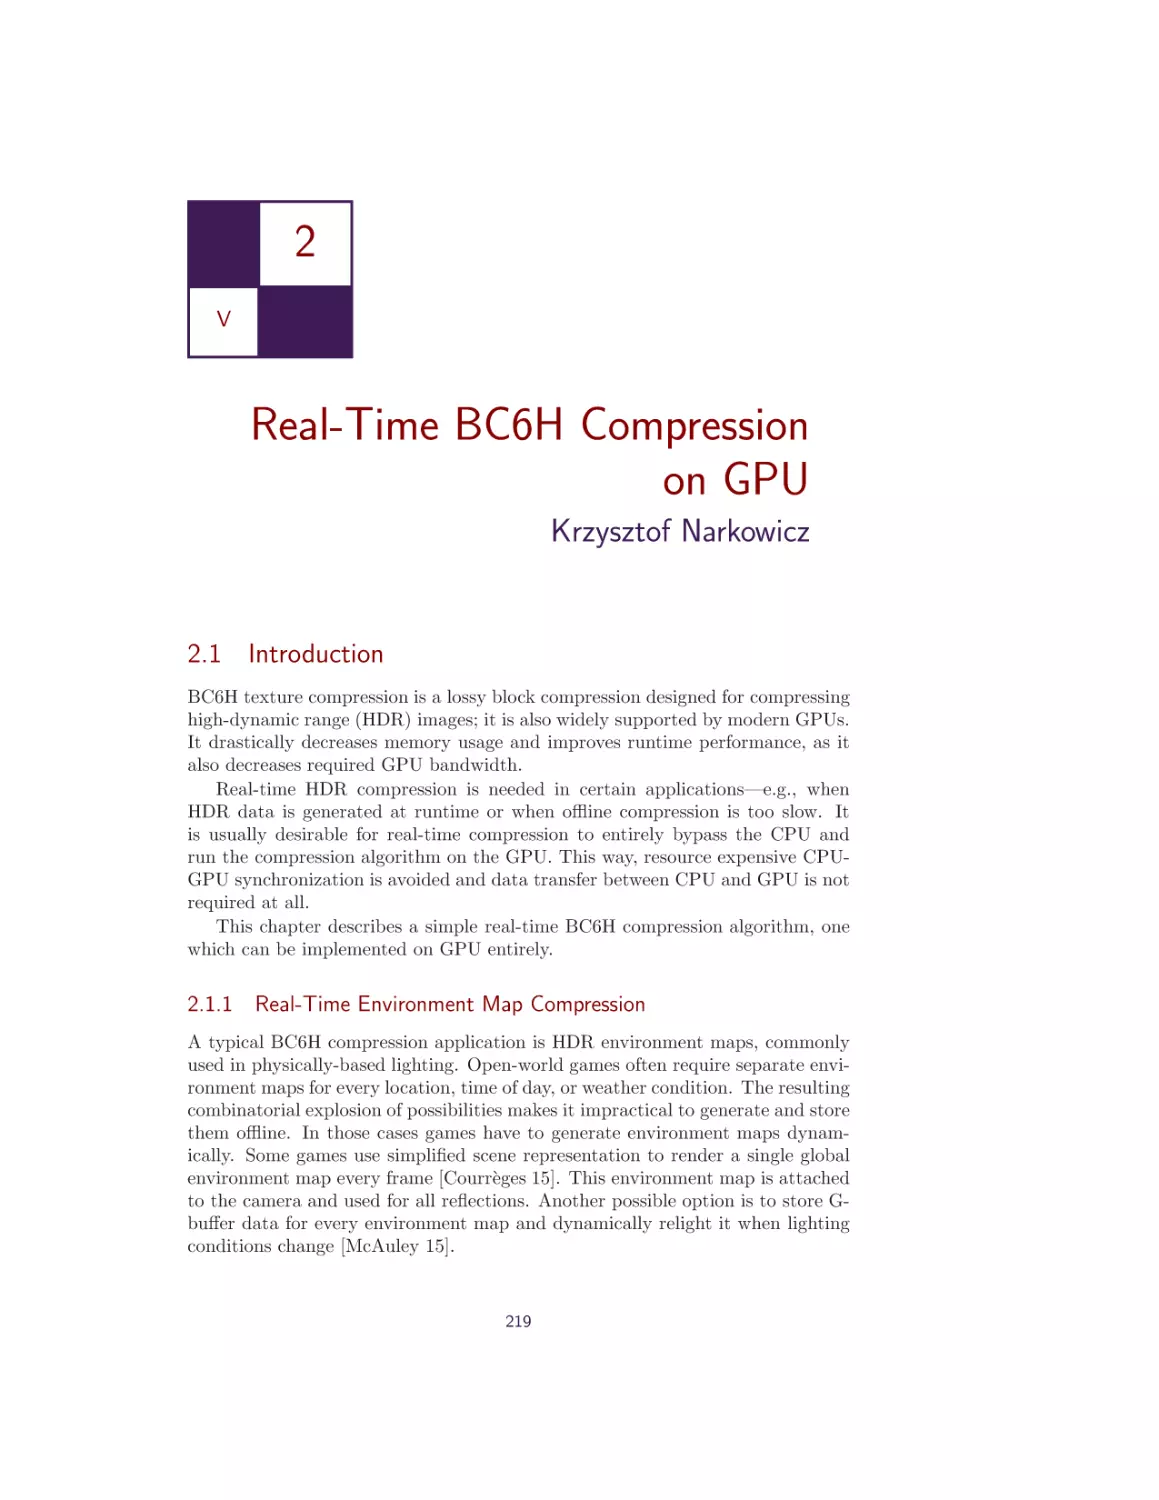 2. Real-Time BC6H Compression on GPU